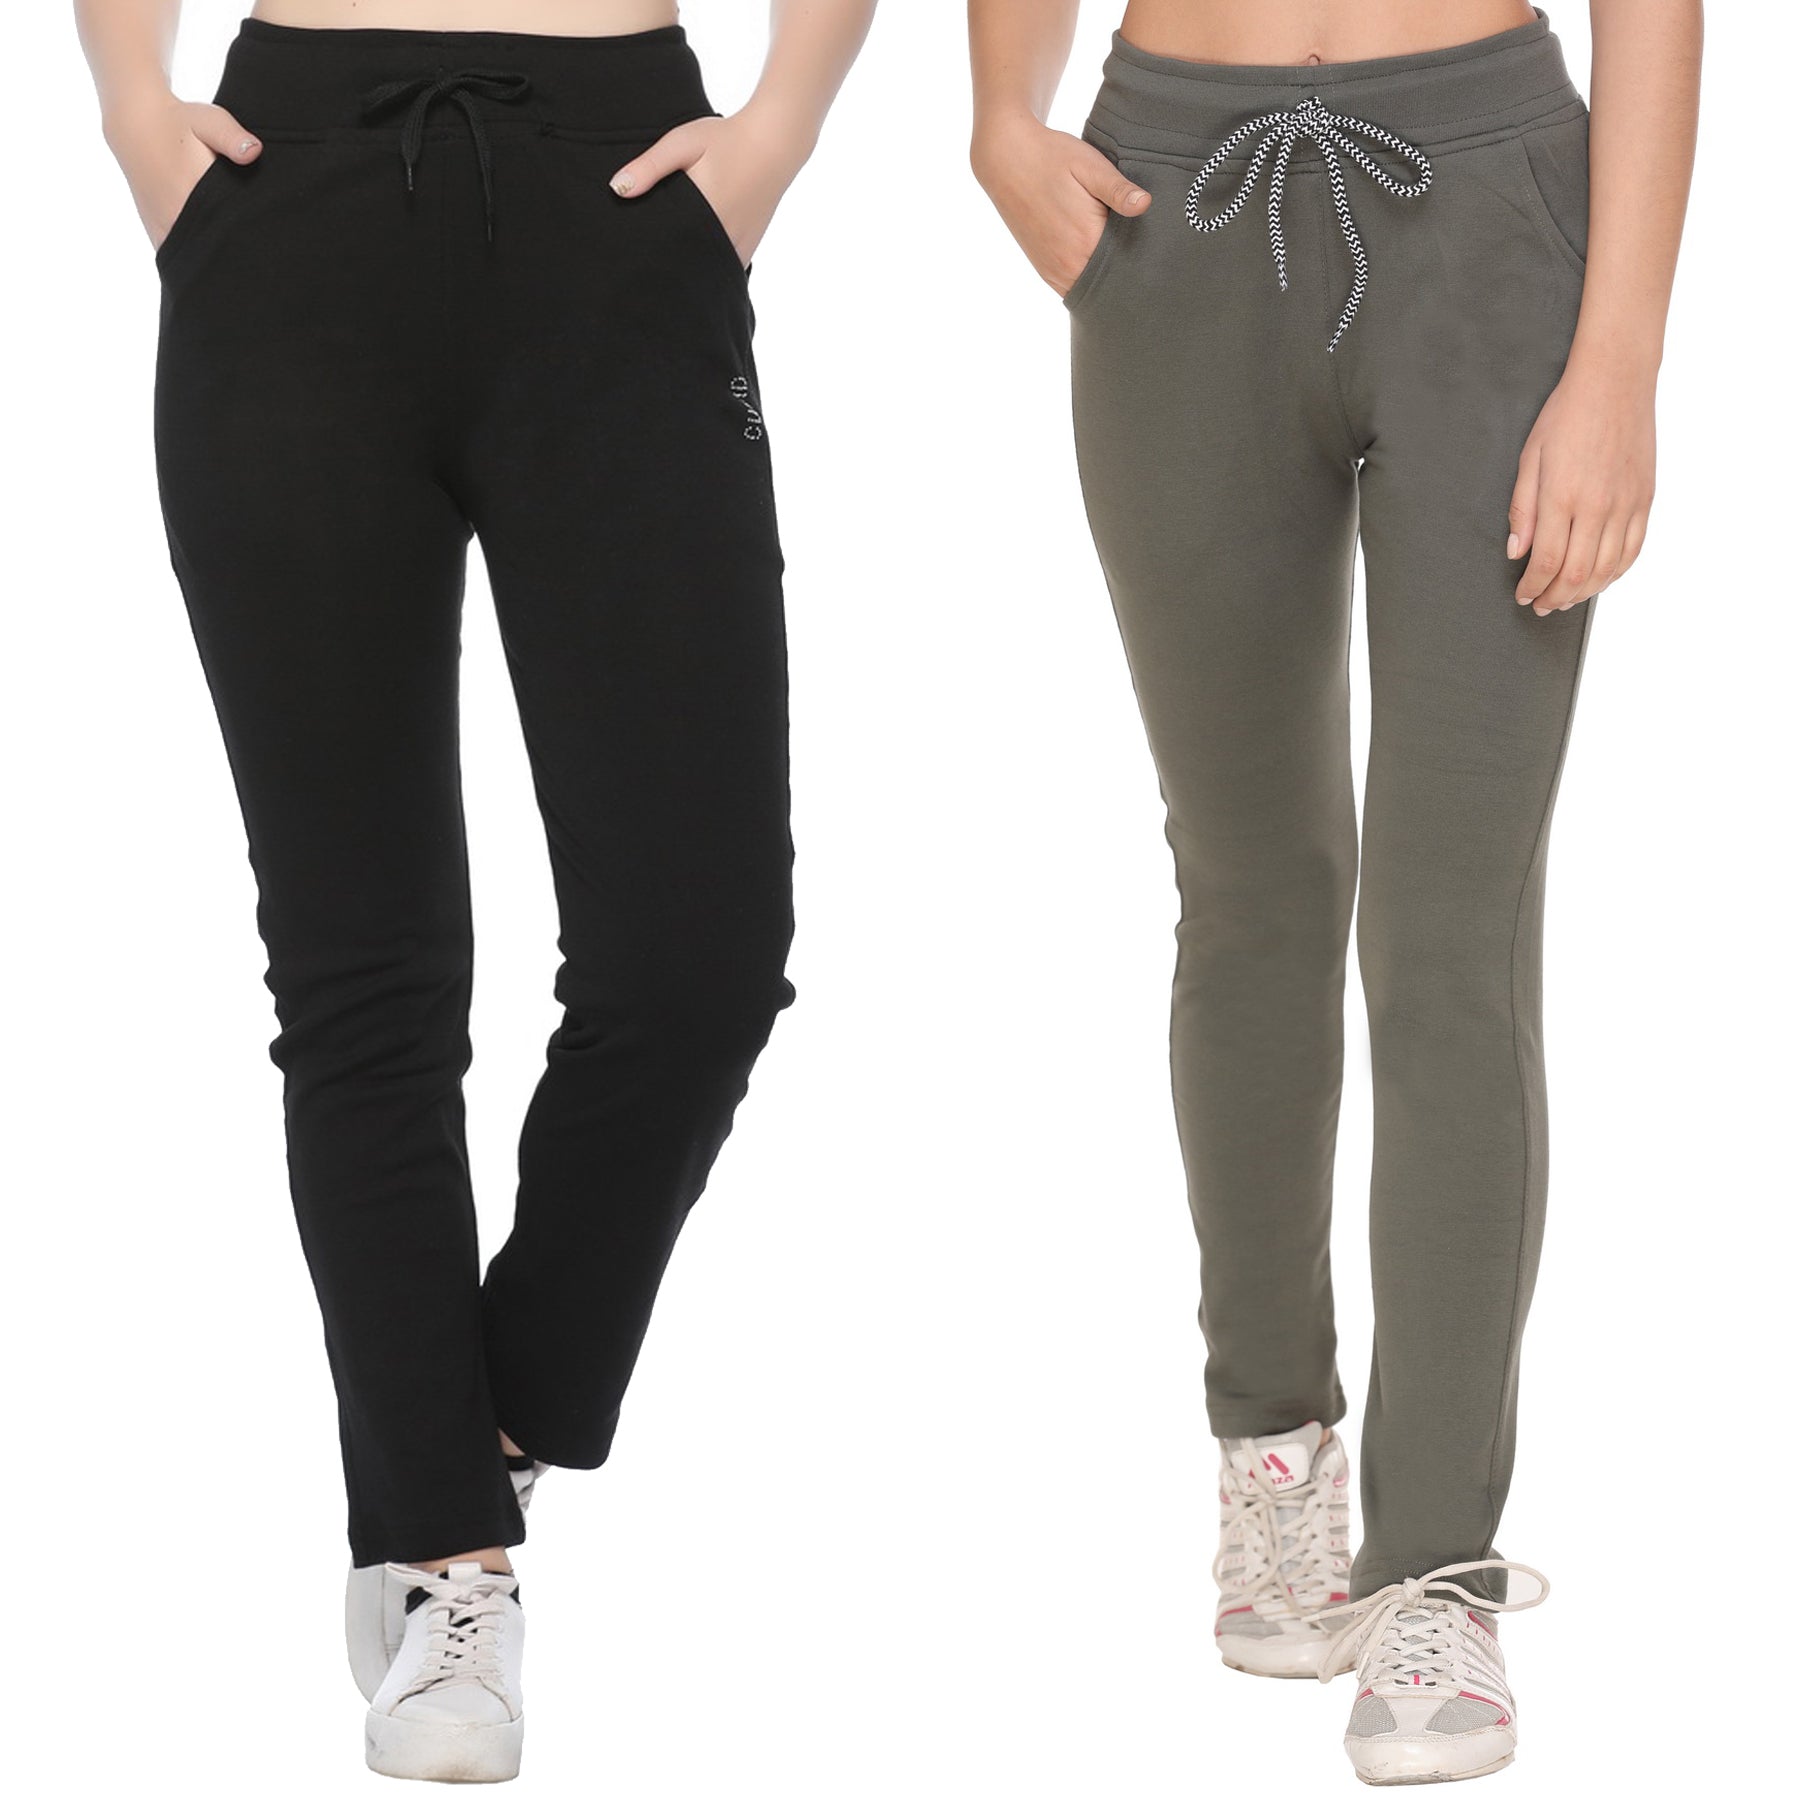 Stretchable Track Pants For Women - Cotton Lycra Activewear - Pack of 2 (Black & Olive Green)